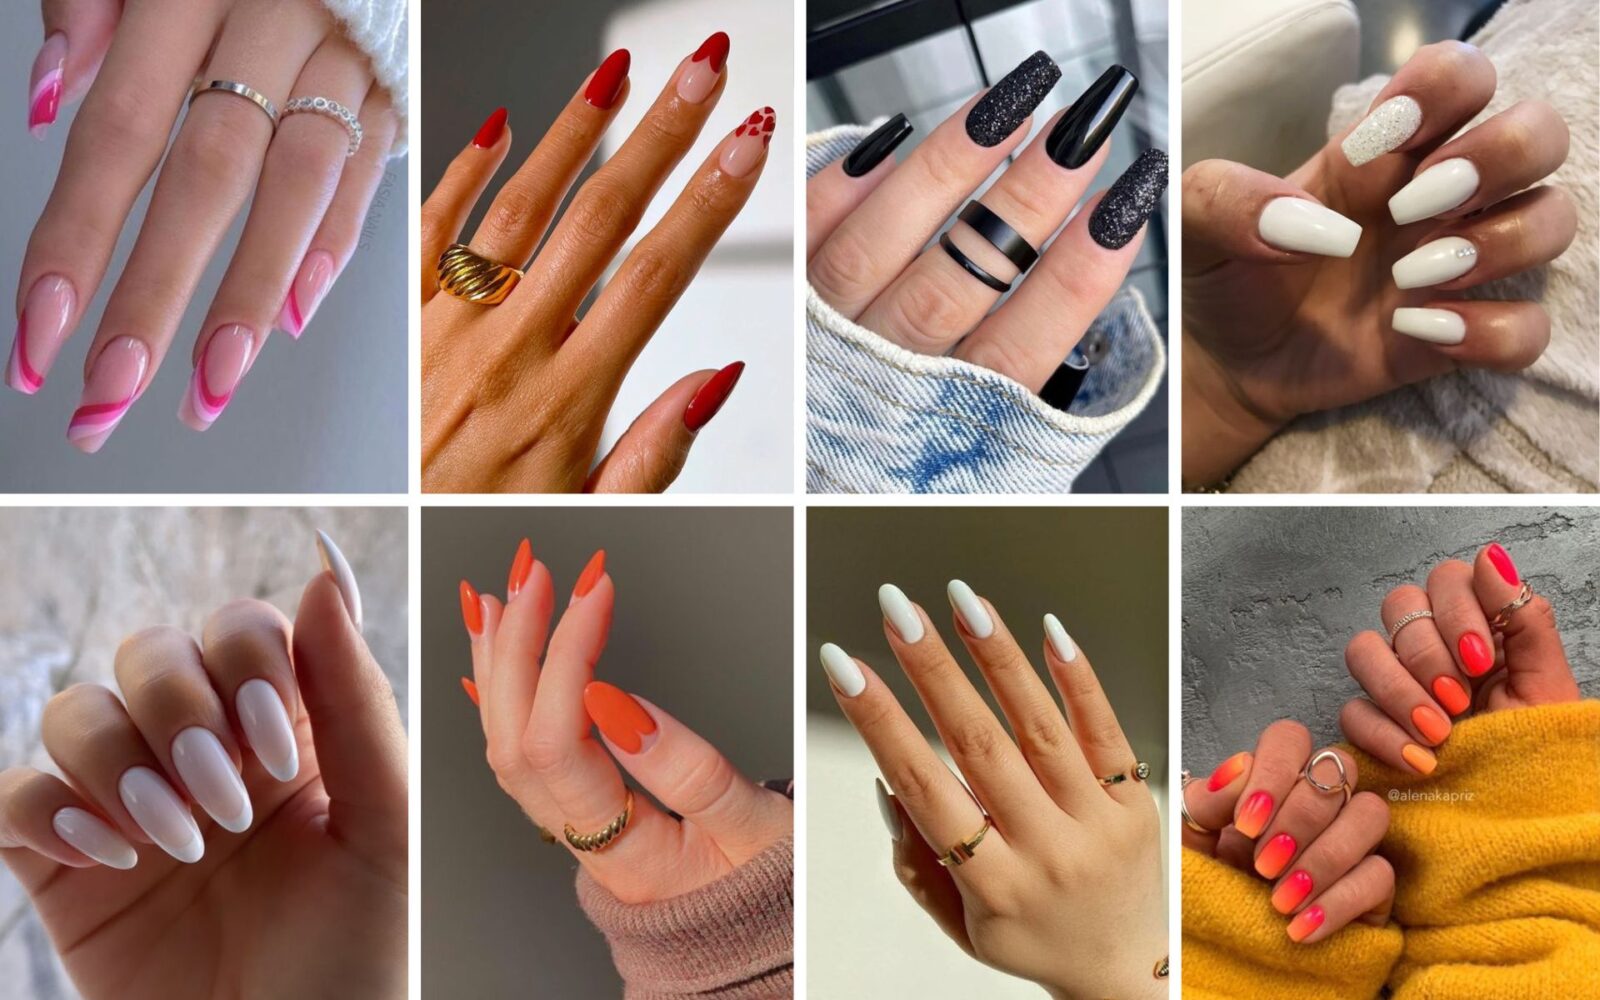 10. Nail Design Ideas for Homecoming - wide 3